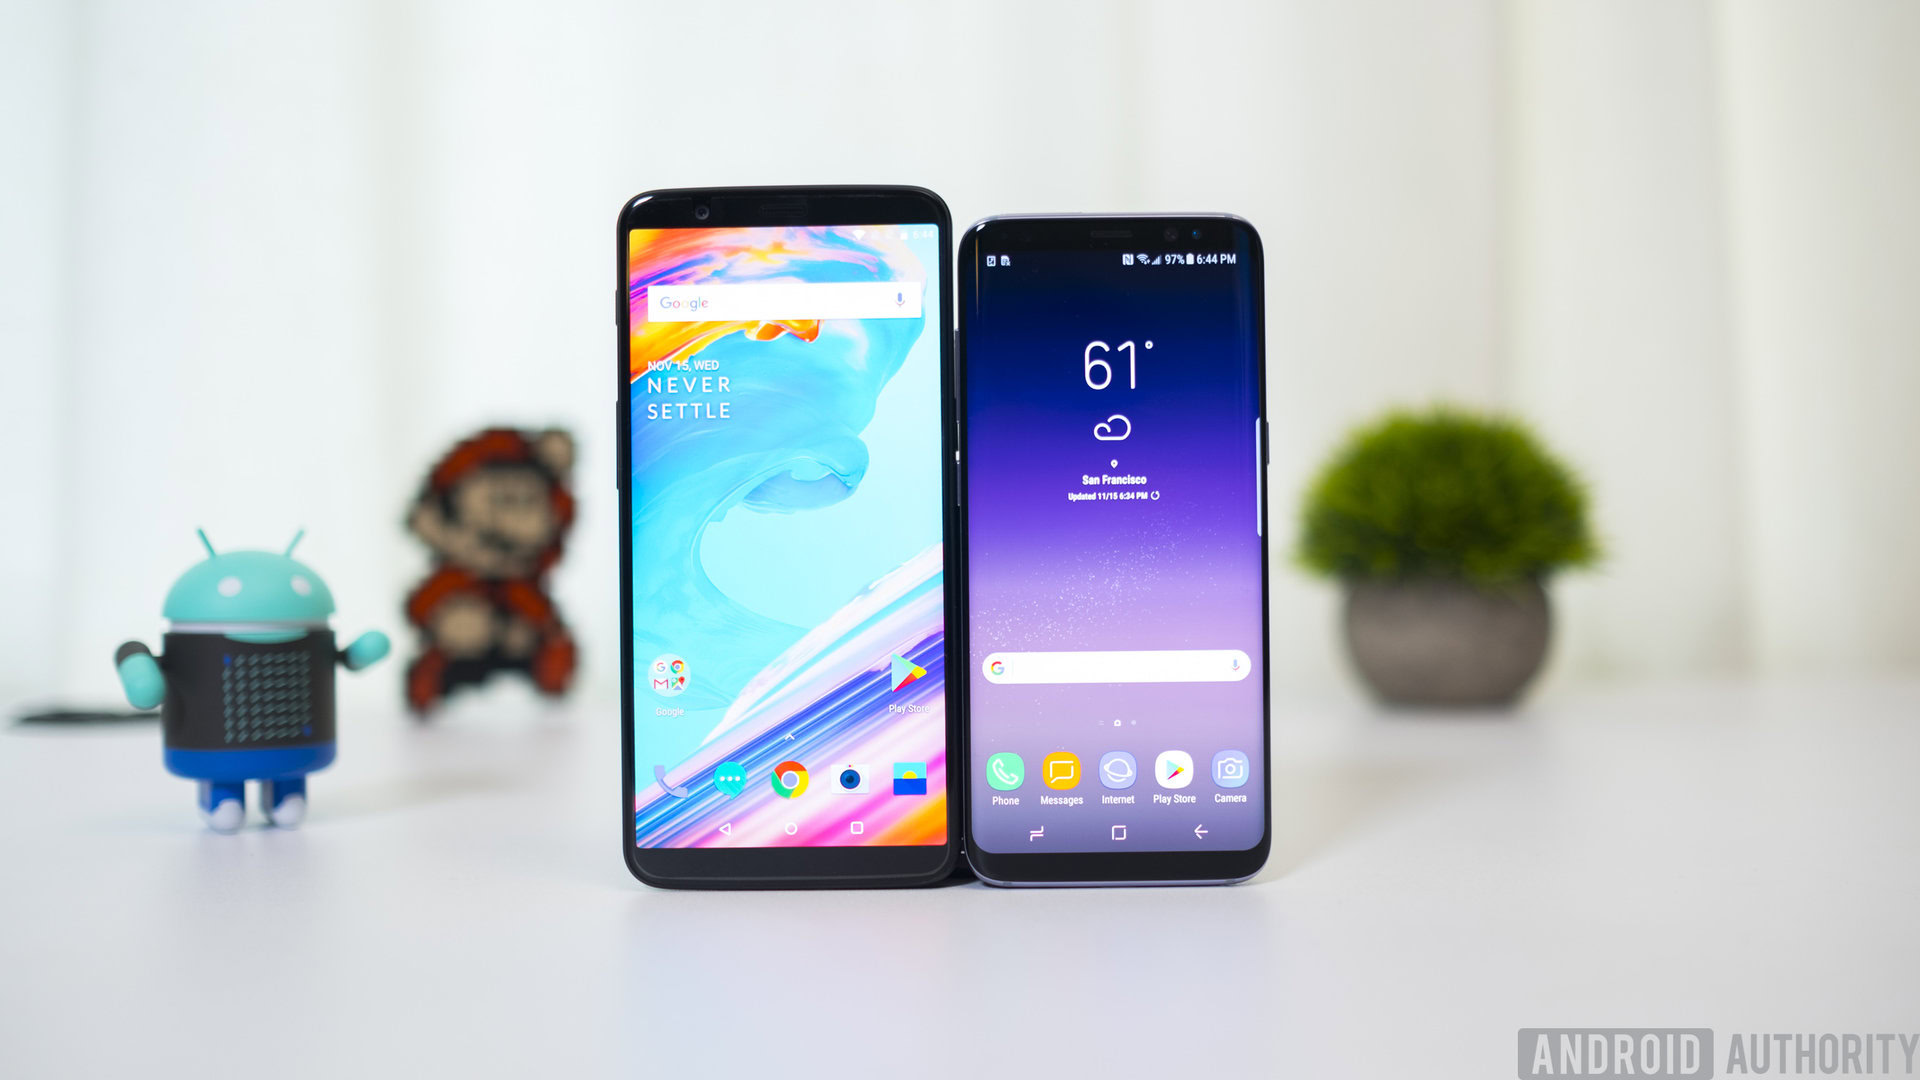 S6a touch samsung vs nokia 5t 8 vs s8 oneplus vibe shot xperia